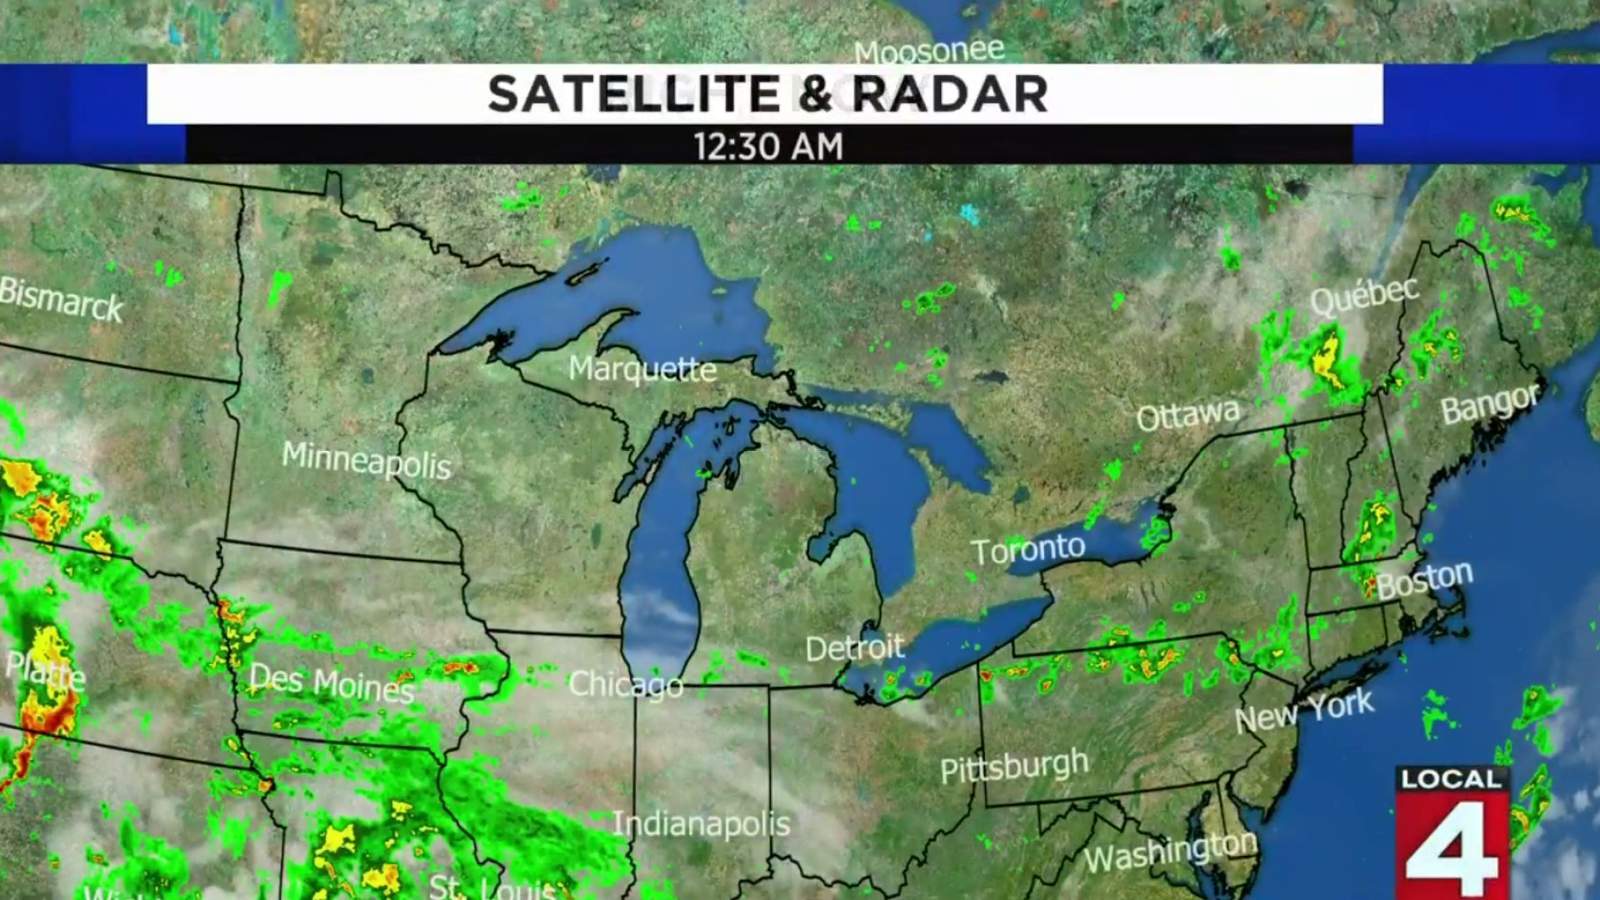 Metro Detroit weather: Not much drought relief, until the weekend